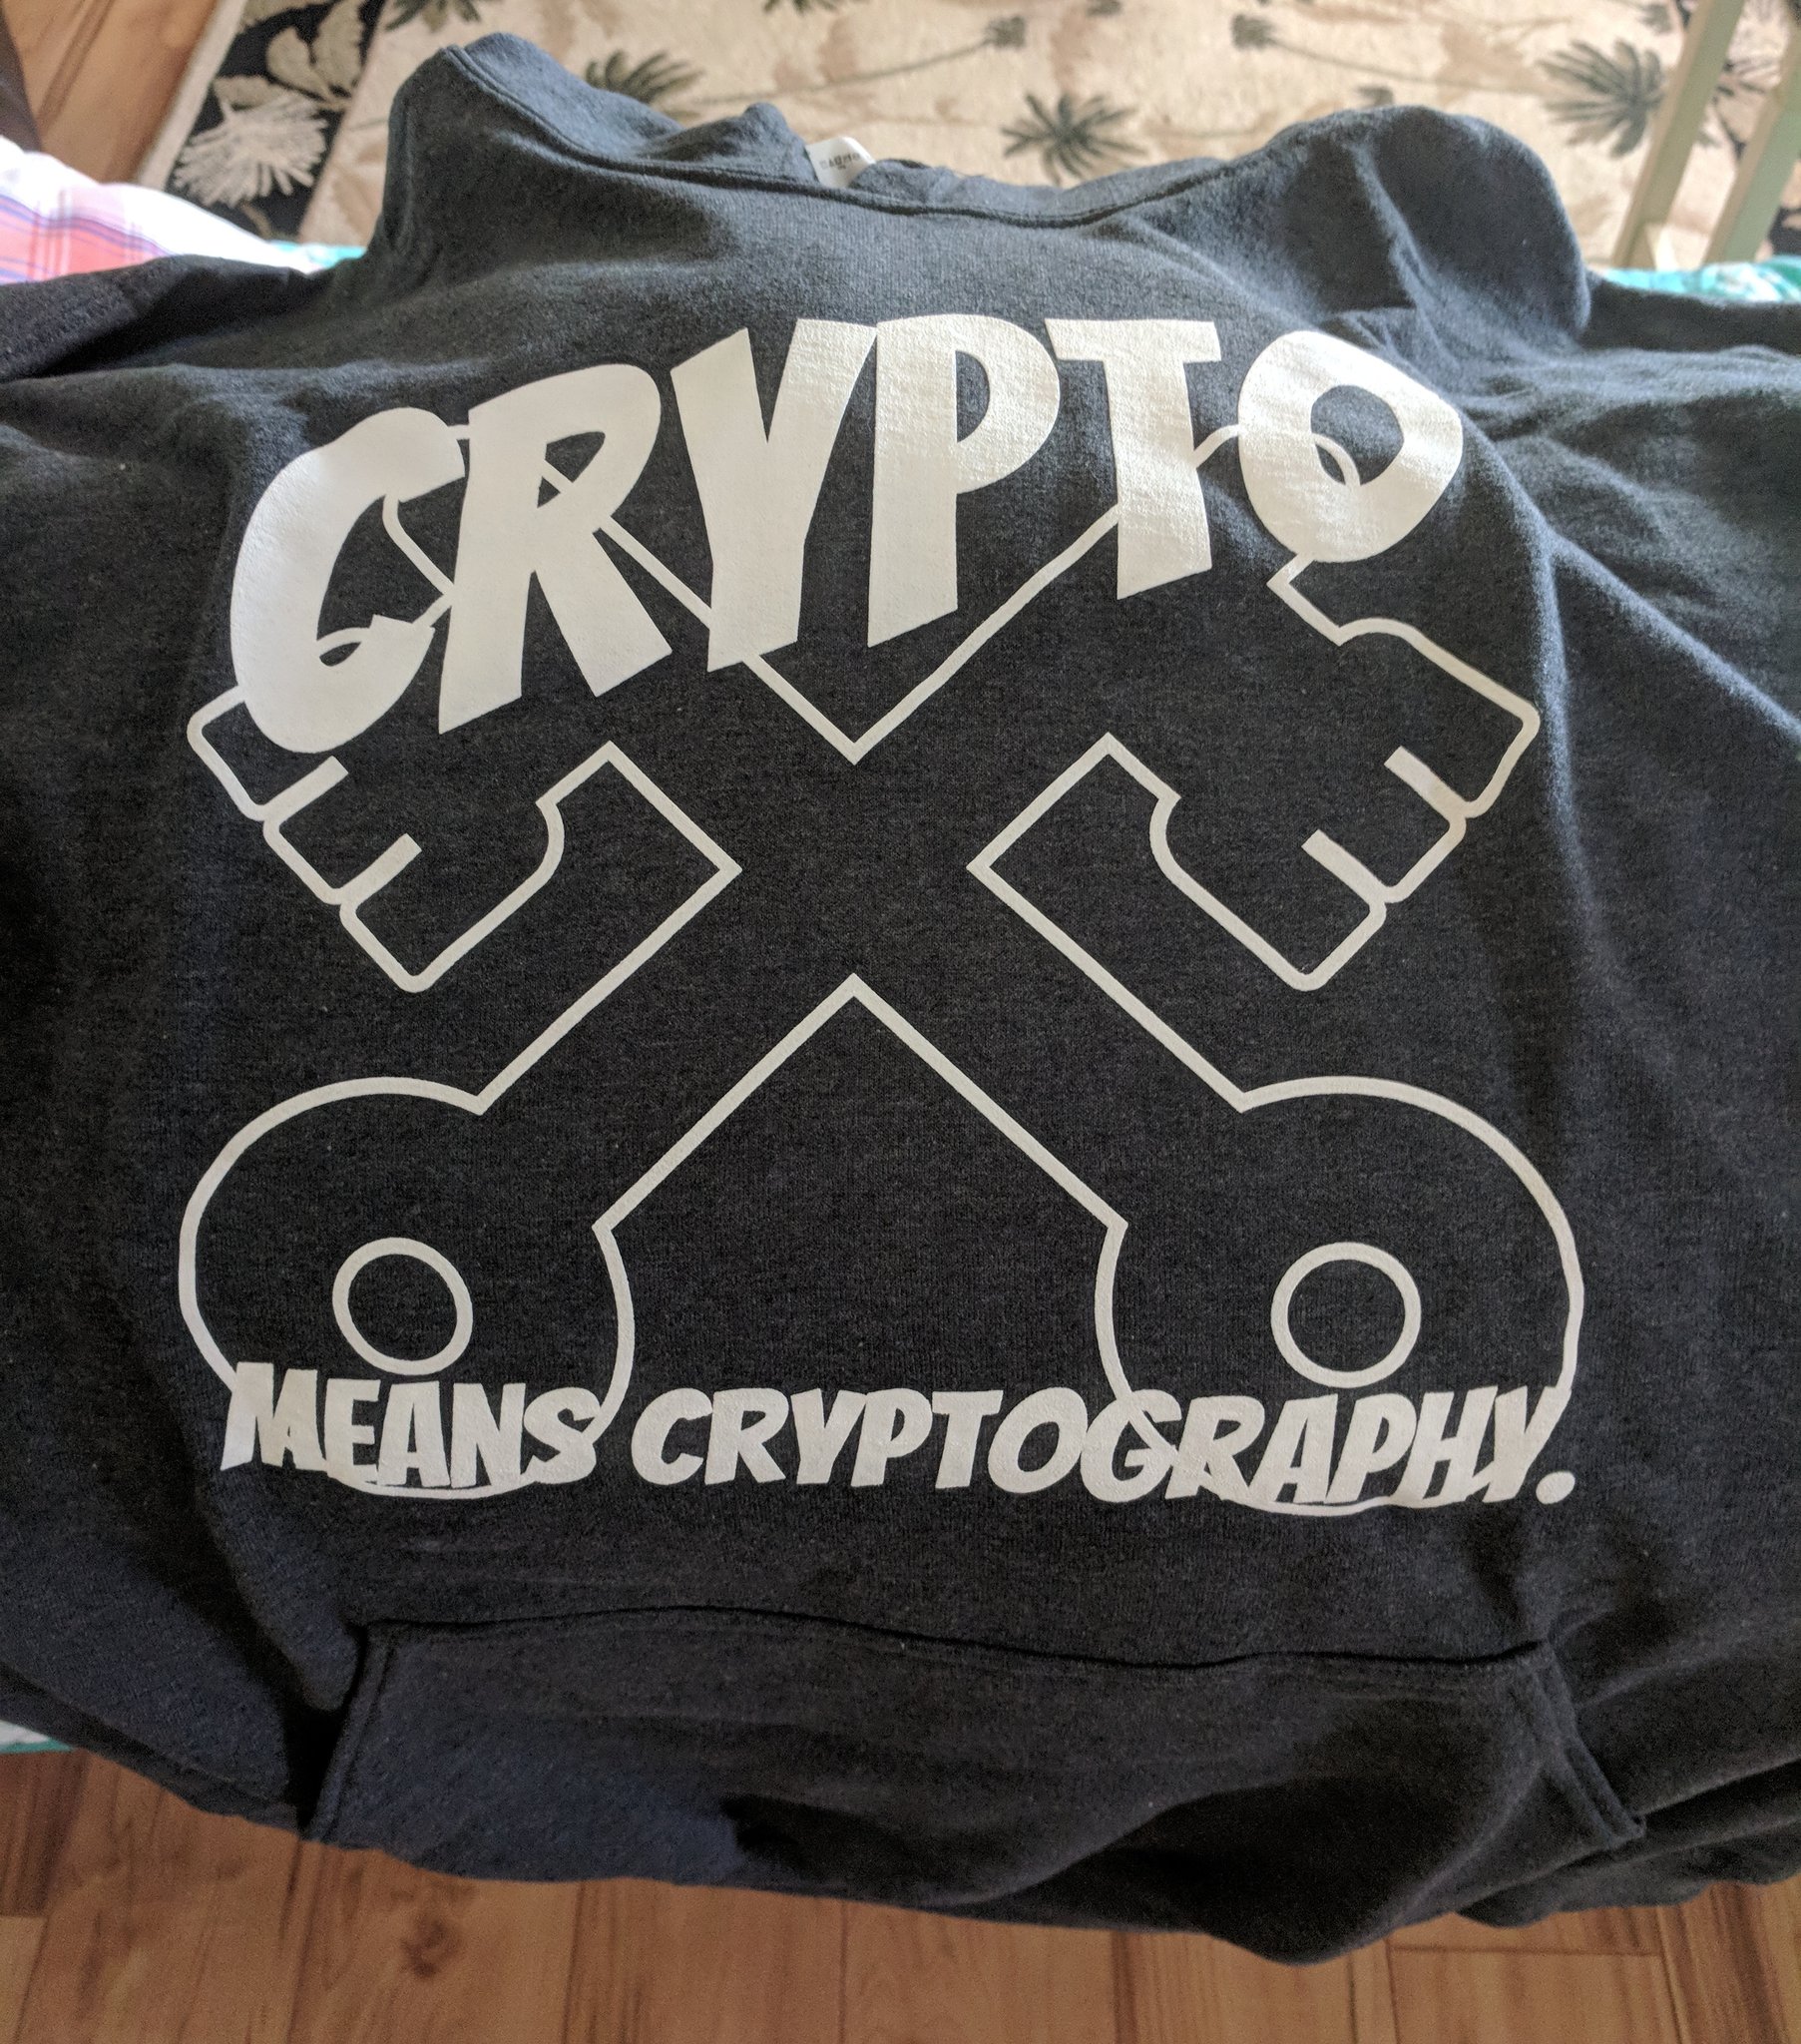 Crypto means cryptography